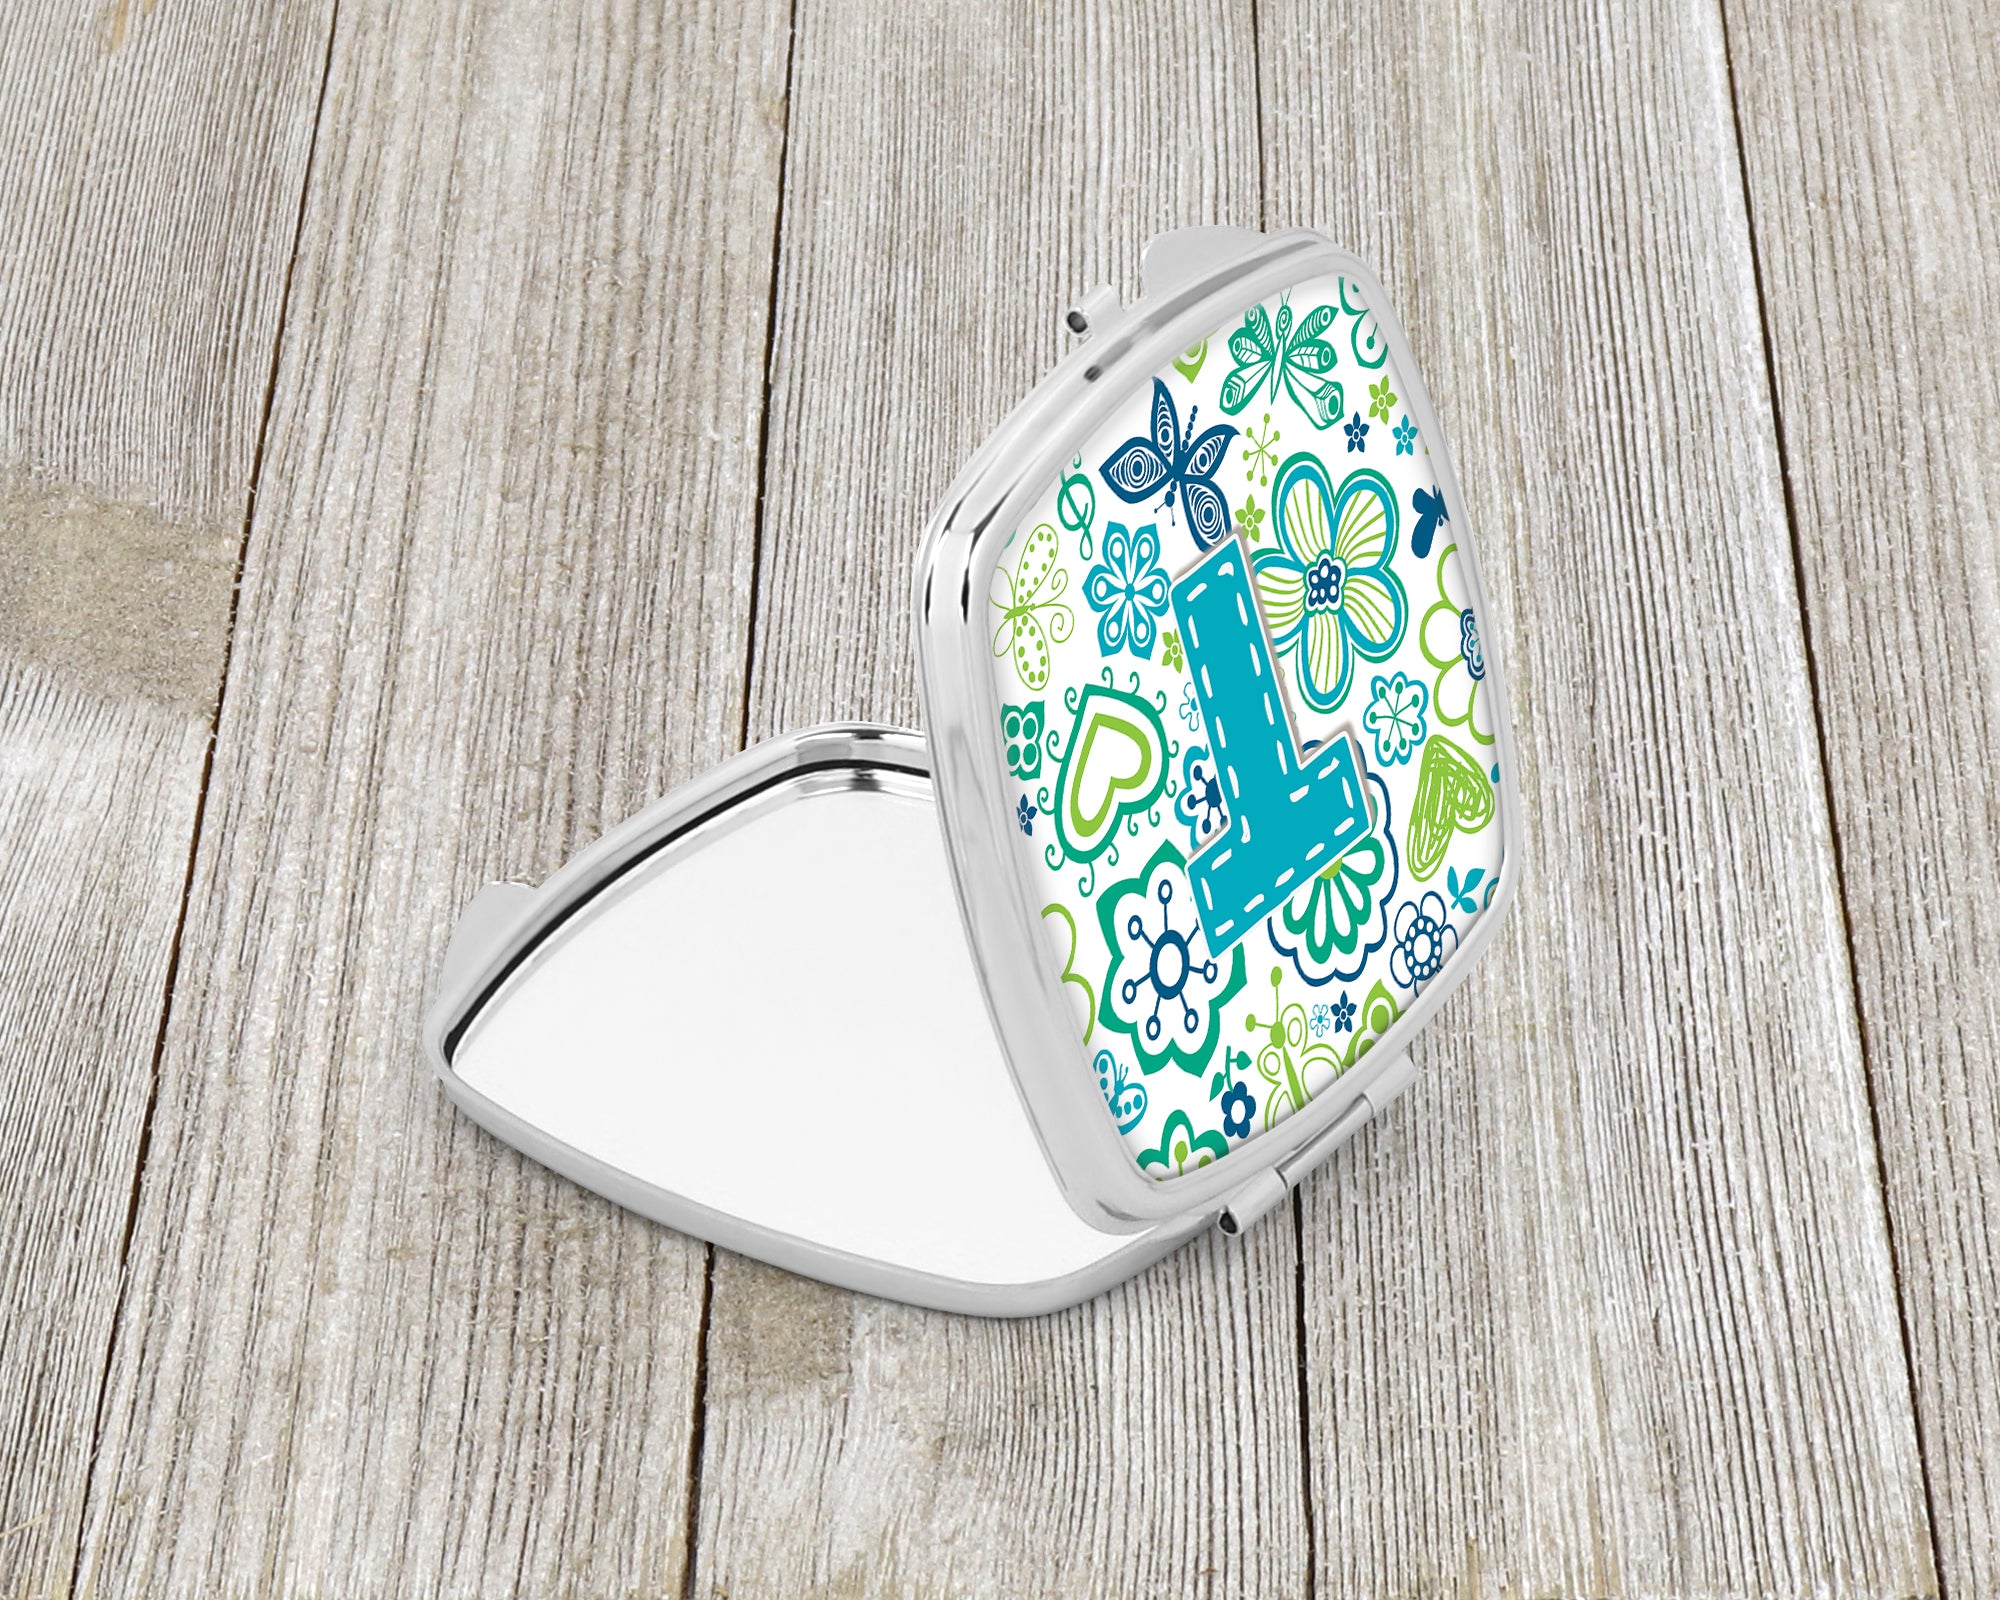 Letter T Flowers and Butterflies Teal Blue Compact Mirror CJ2006-TSCM  the-store.com.